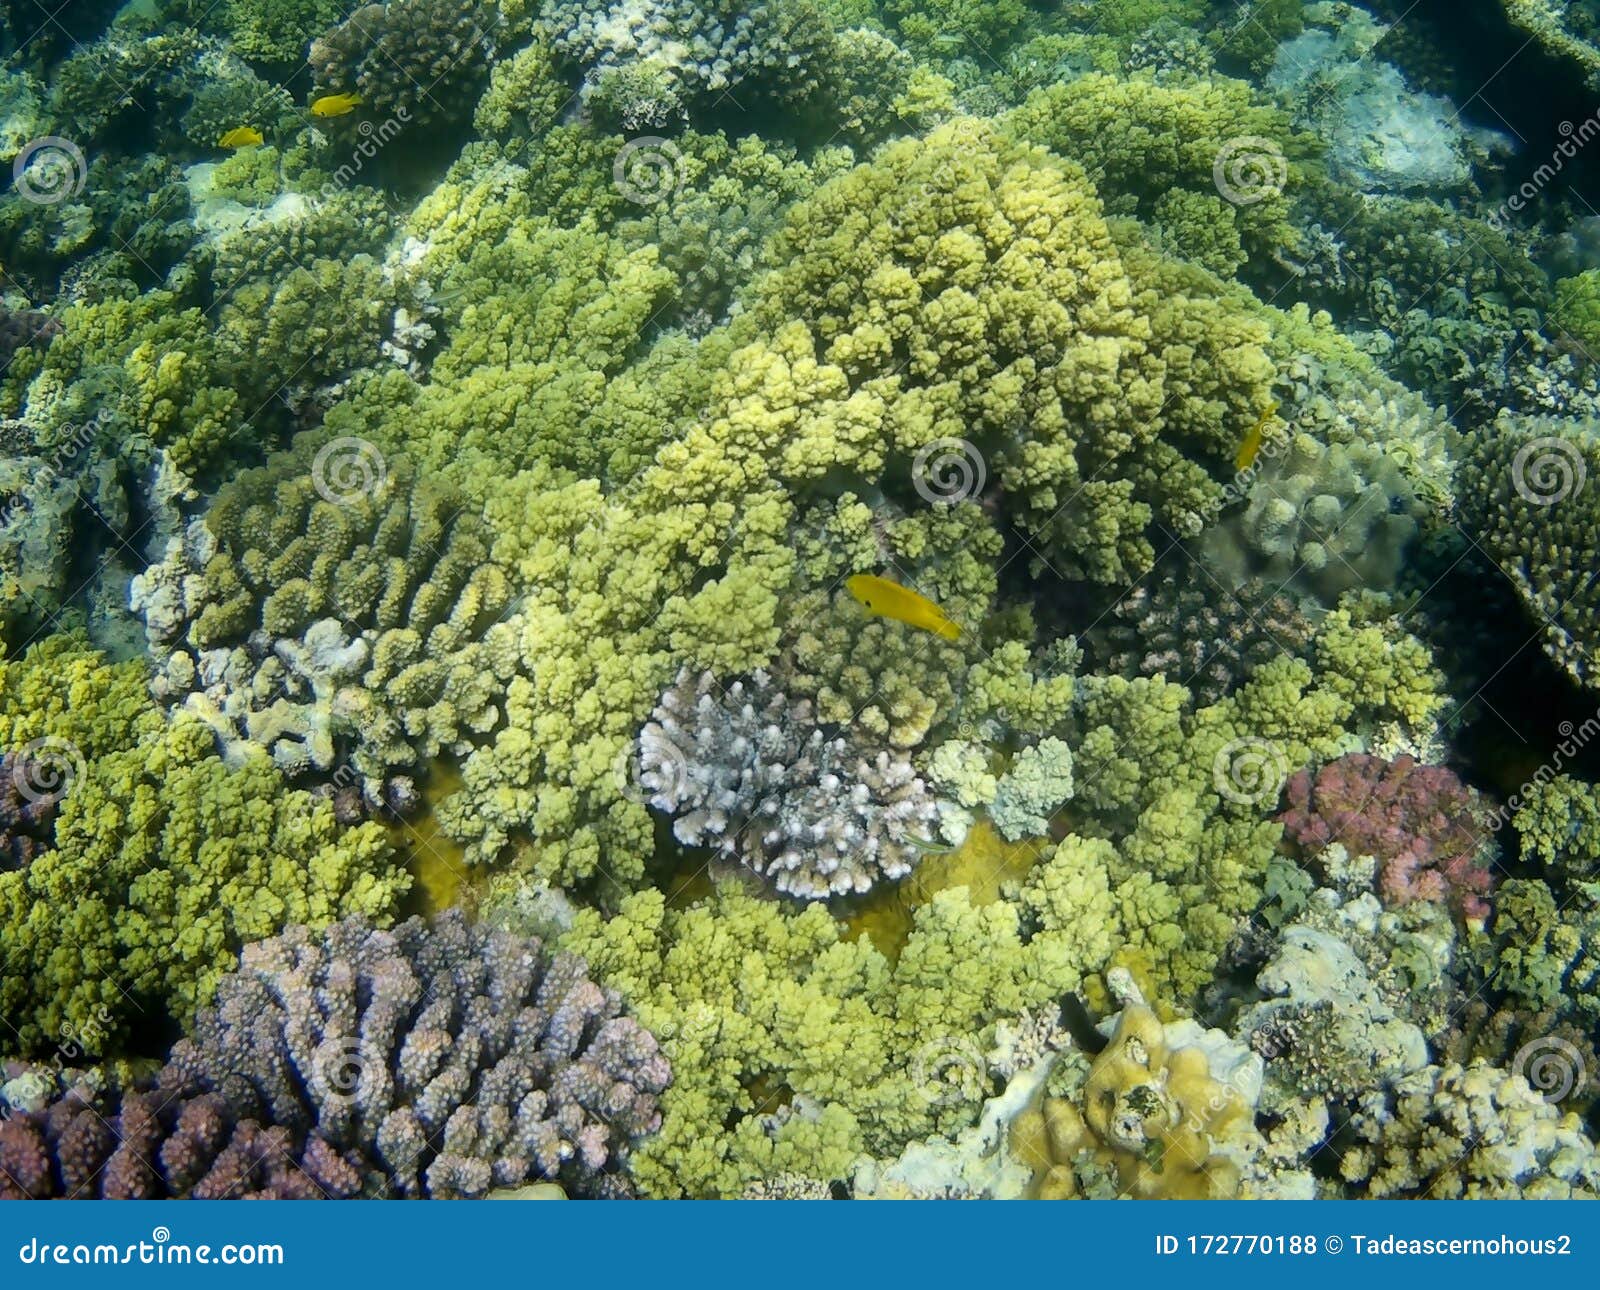 Coral Reef with Tropical Fish, Marsa Alam, Egypt Stock Photo - Image of ...